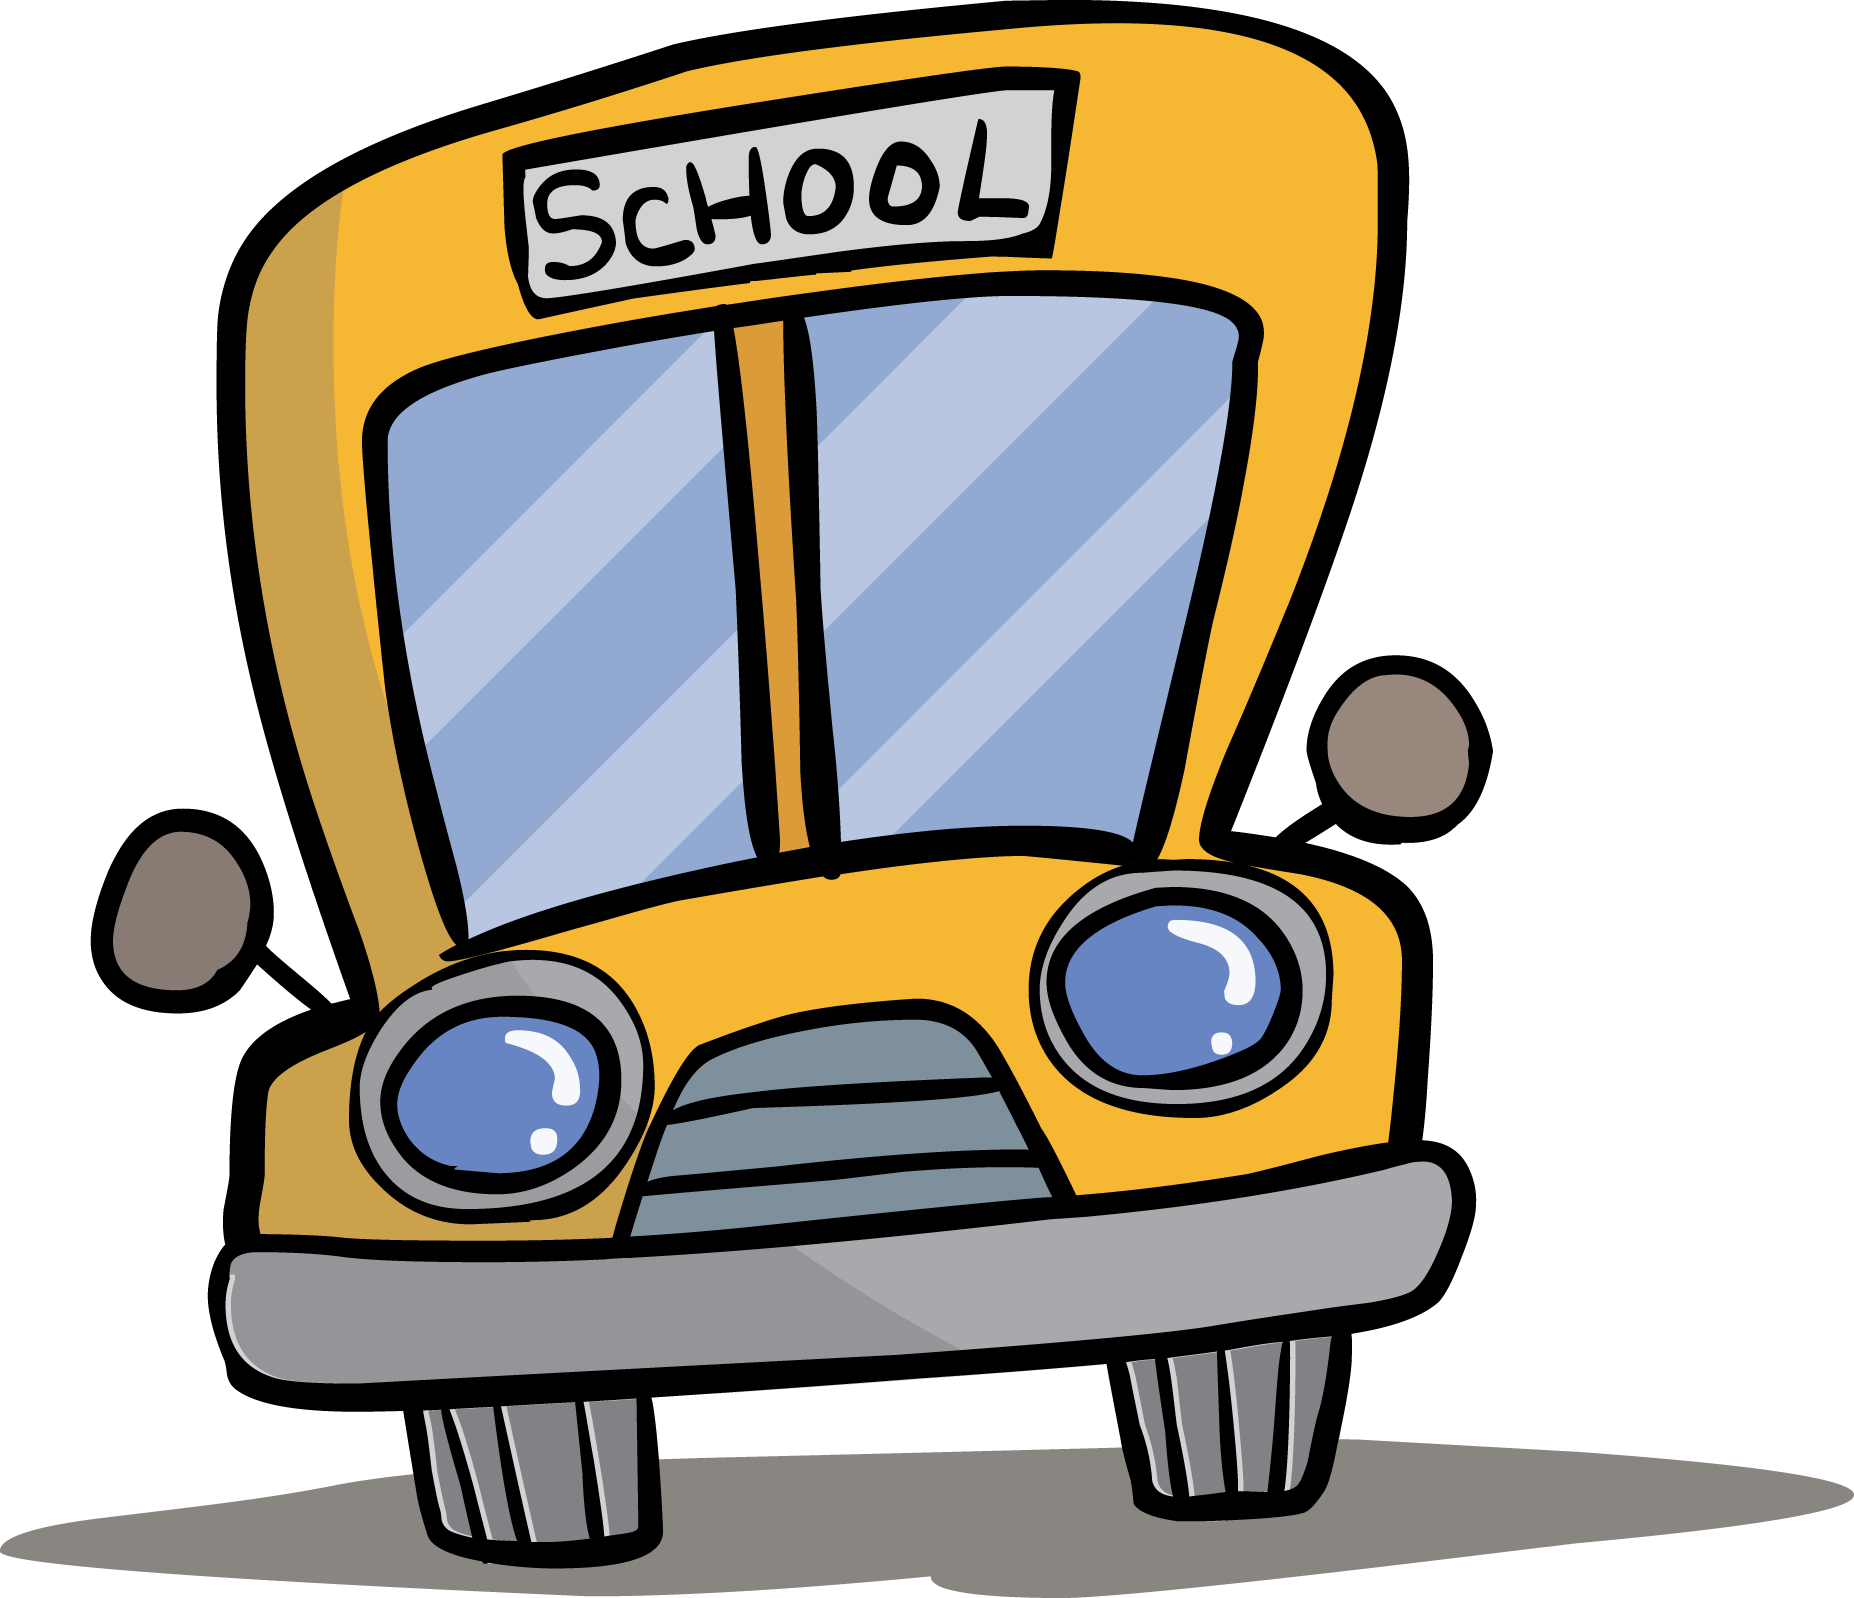 One clipart chapter. Image of school bus